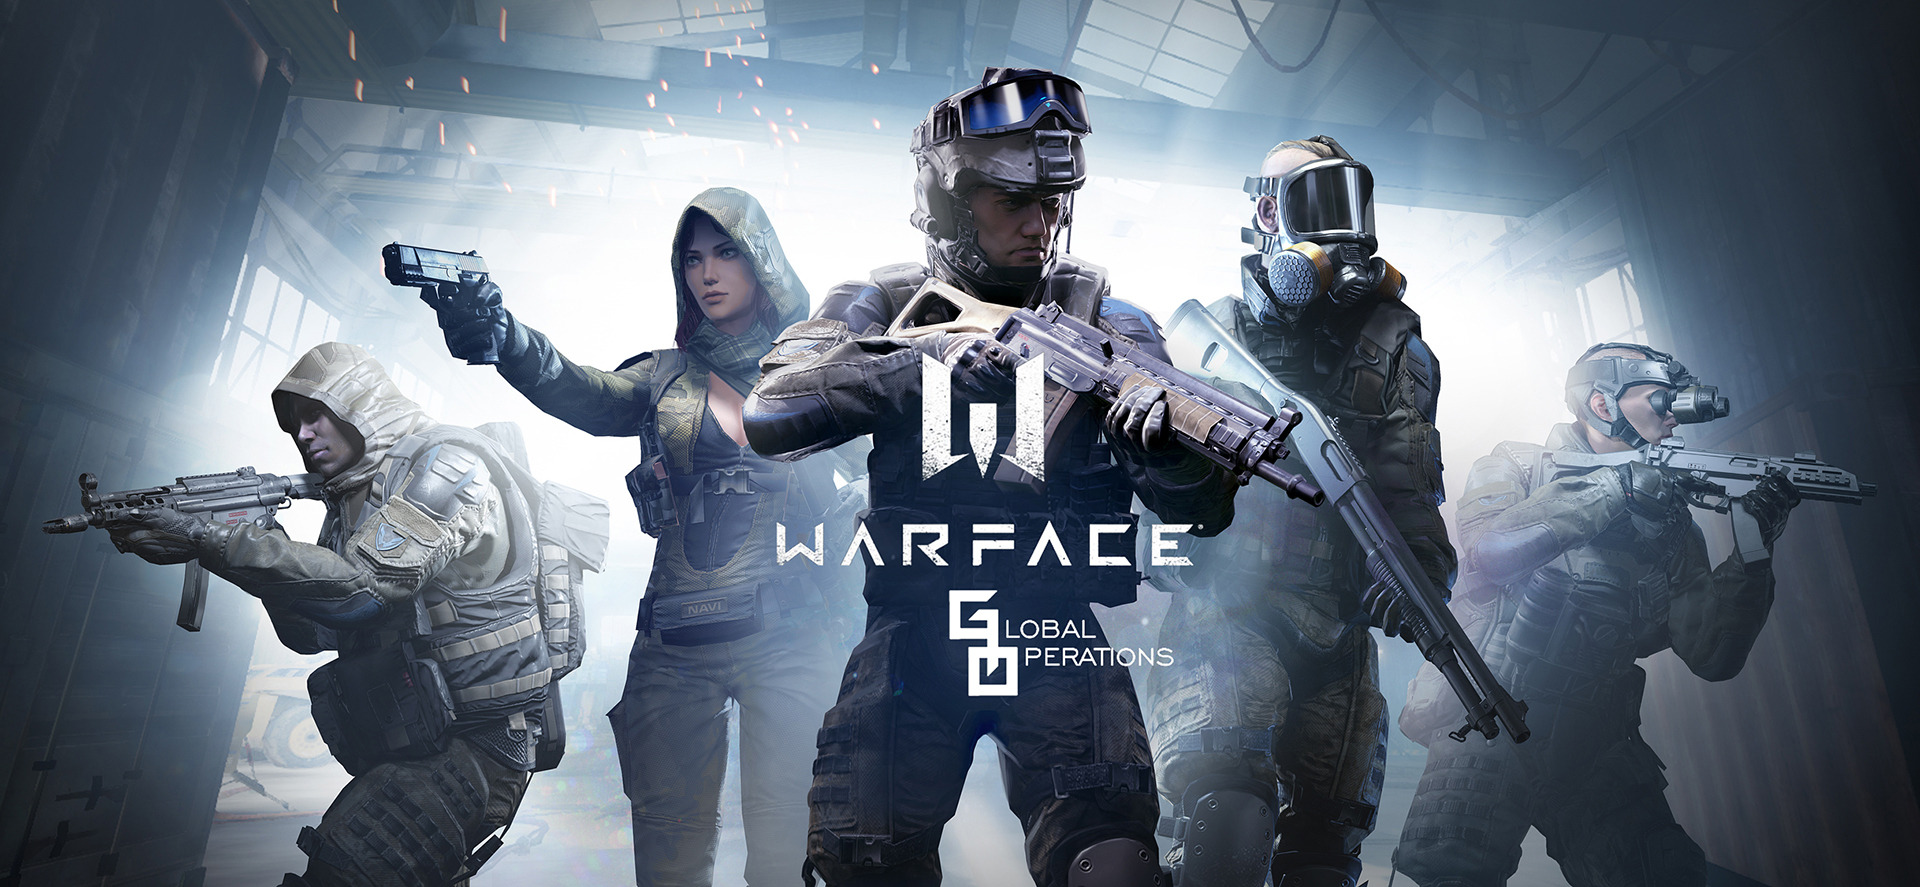 WARFACE GLOBAL OPERATIONS NOW AVAILABLE, FREE TO PLAY ON ANDROID AND IOS